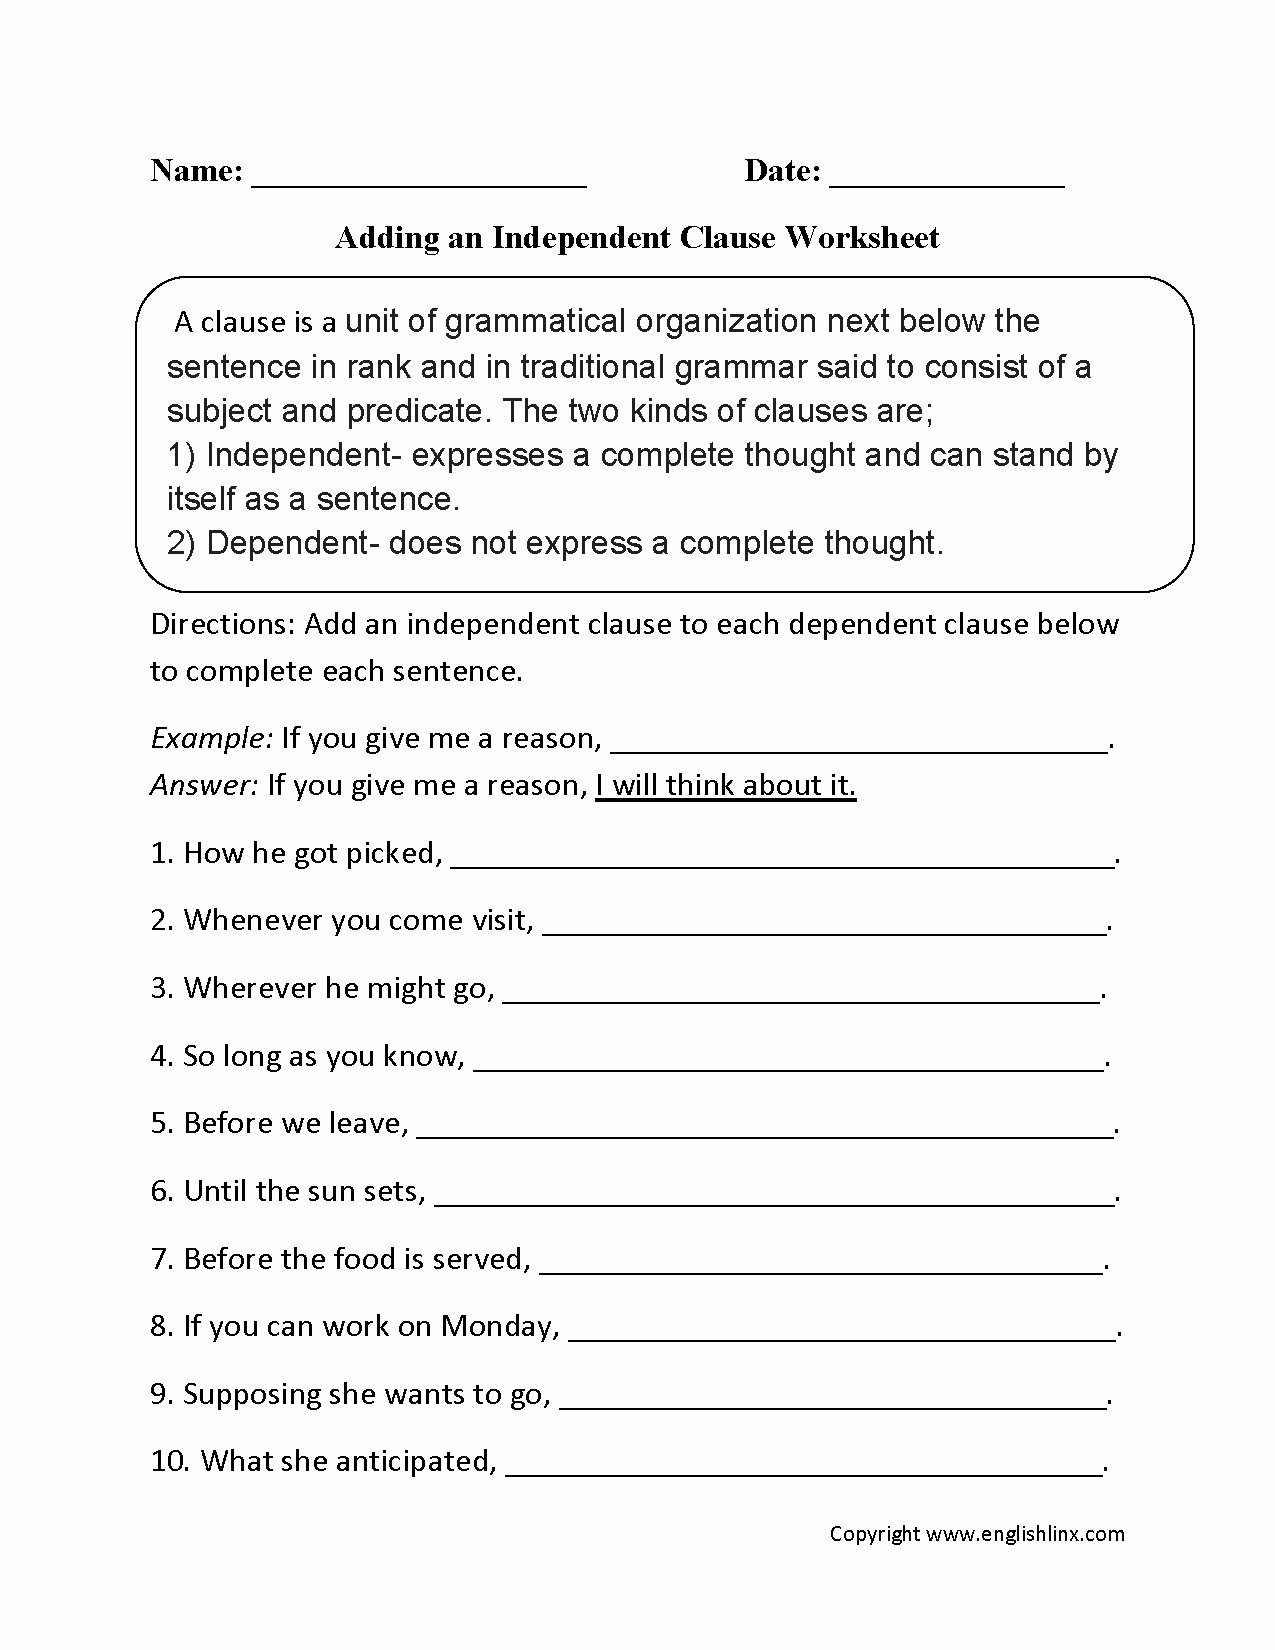 Independent and Dependent Clauses Worksheet Fresh Adding An Inependent Clause Worksheet